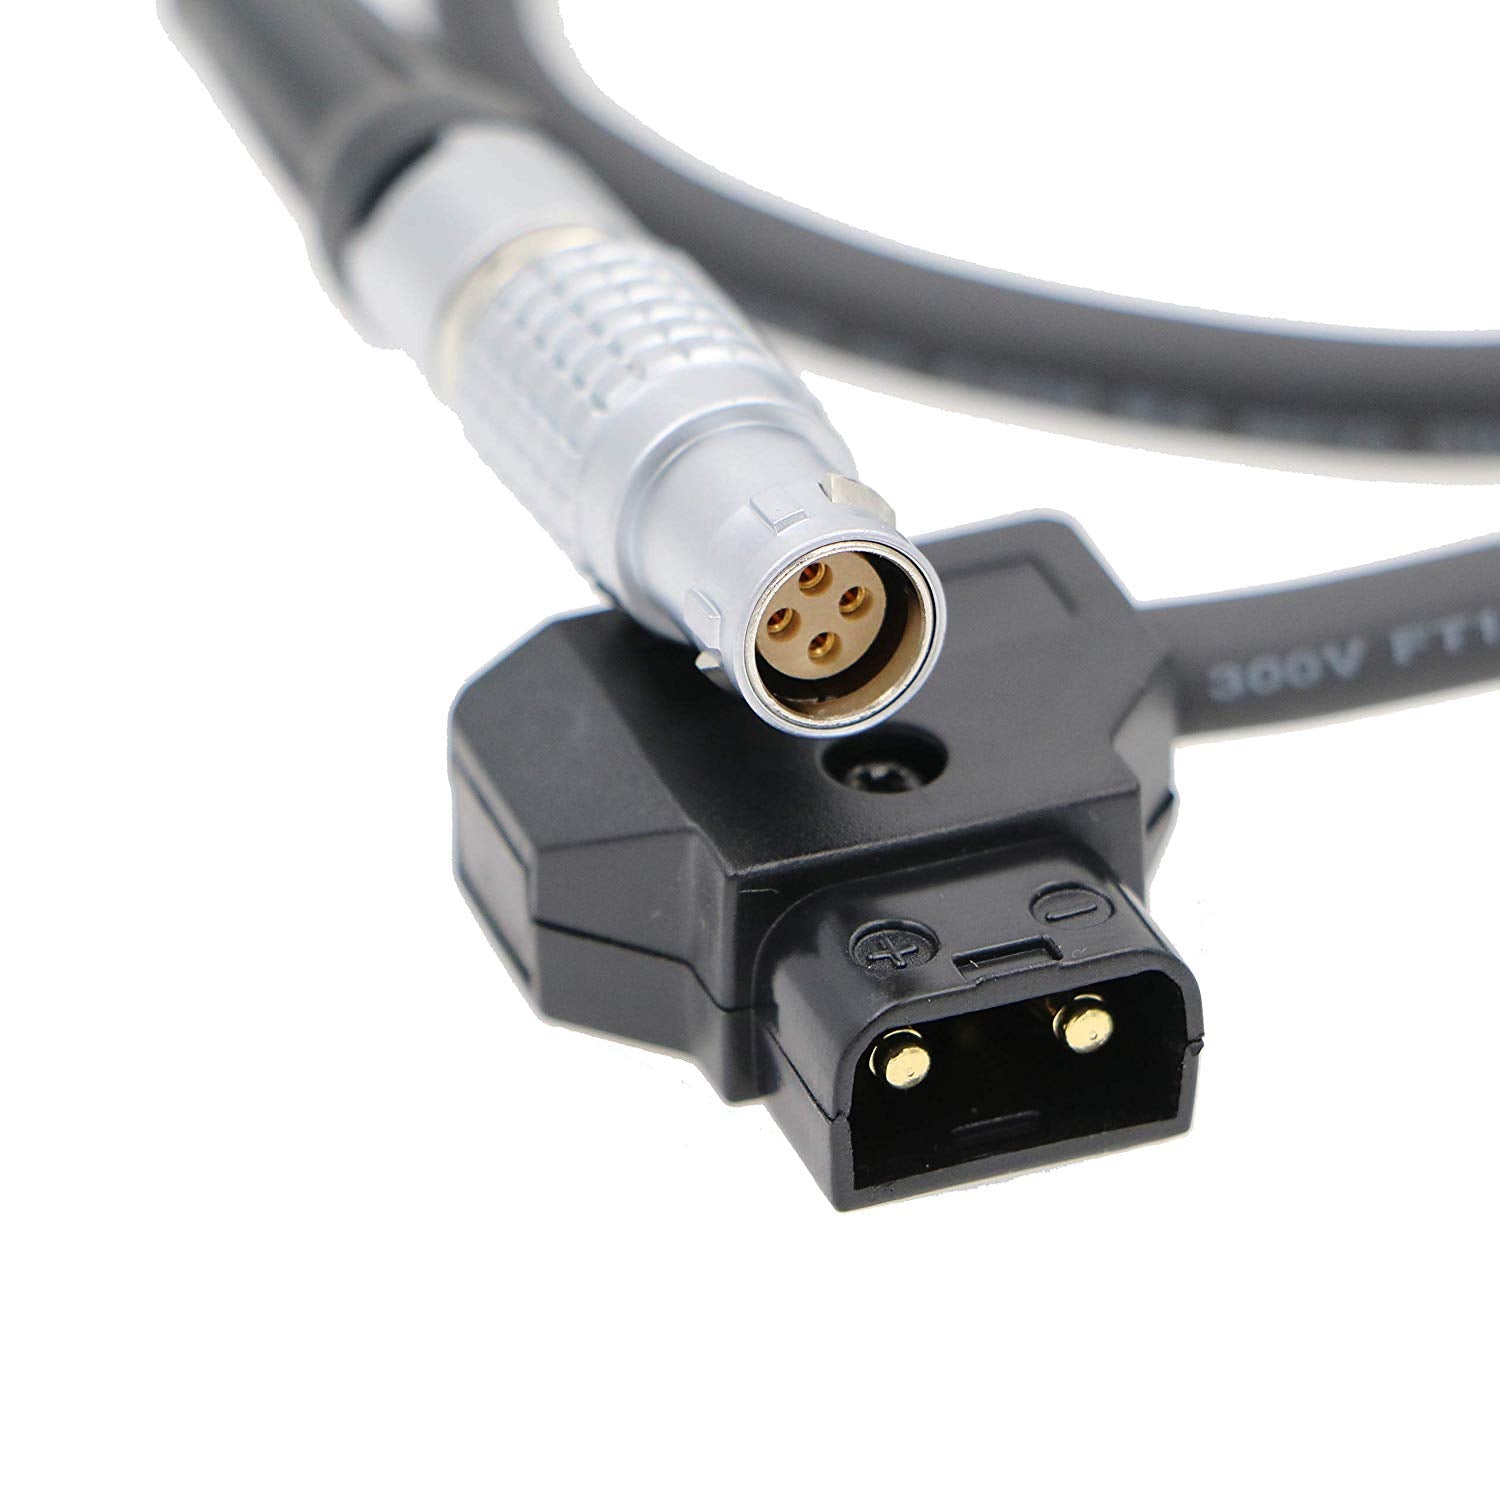 Alvin's Cables 4 Pin FGK Female to D Tap Power Cable for Canon Mark II C100 C500